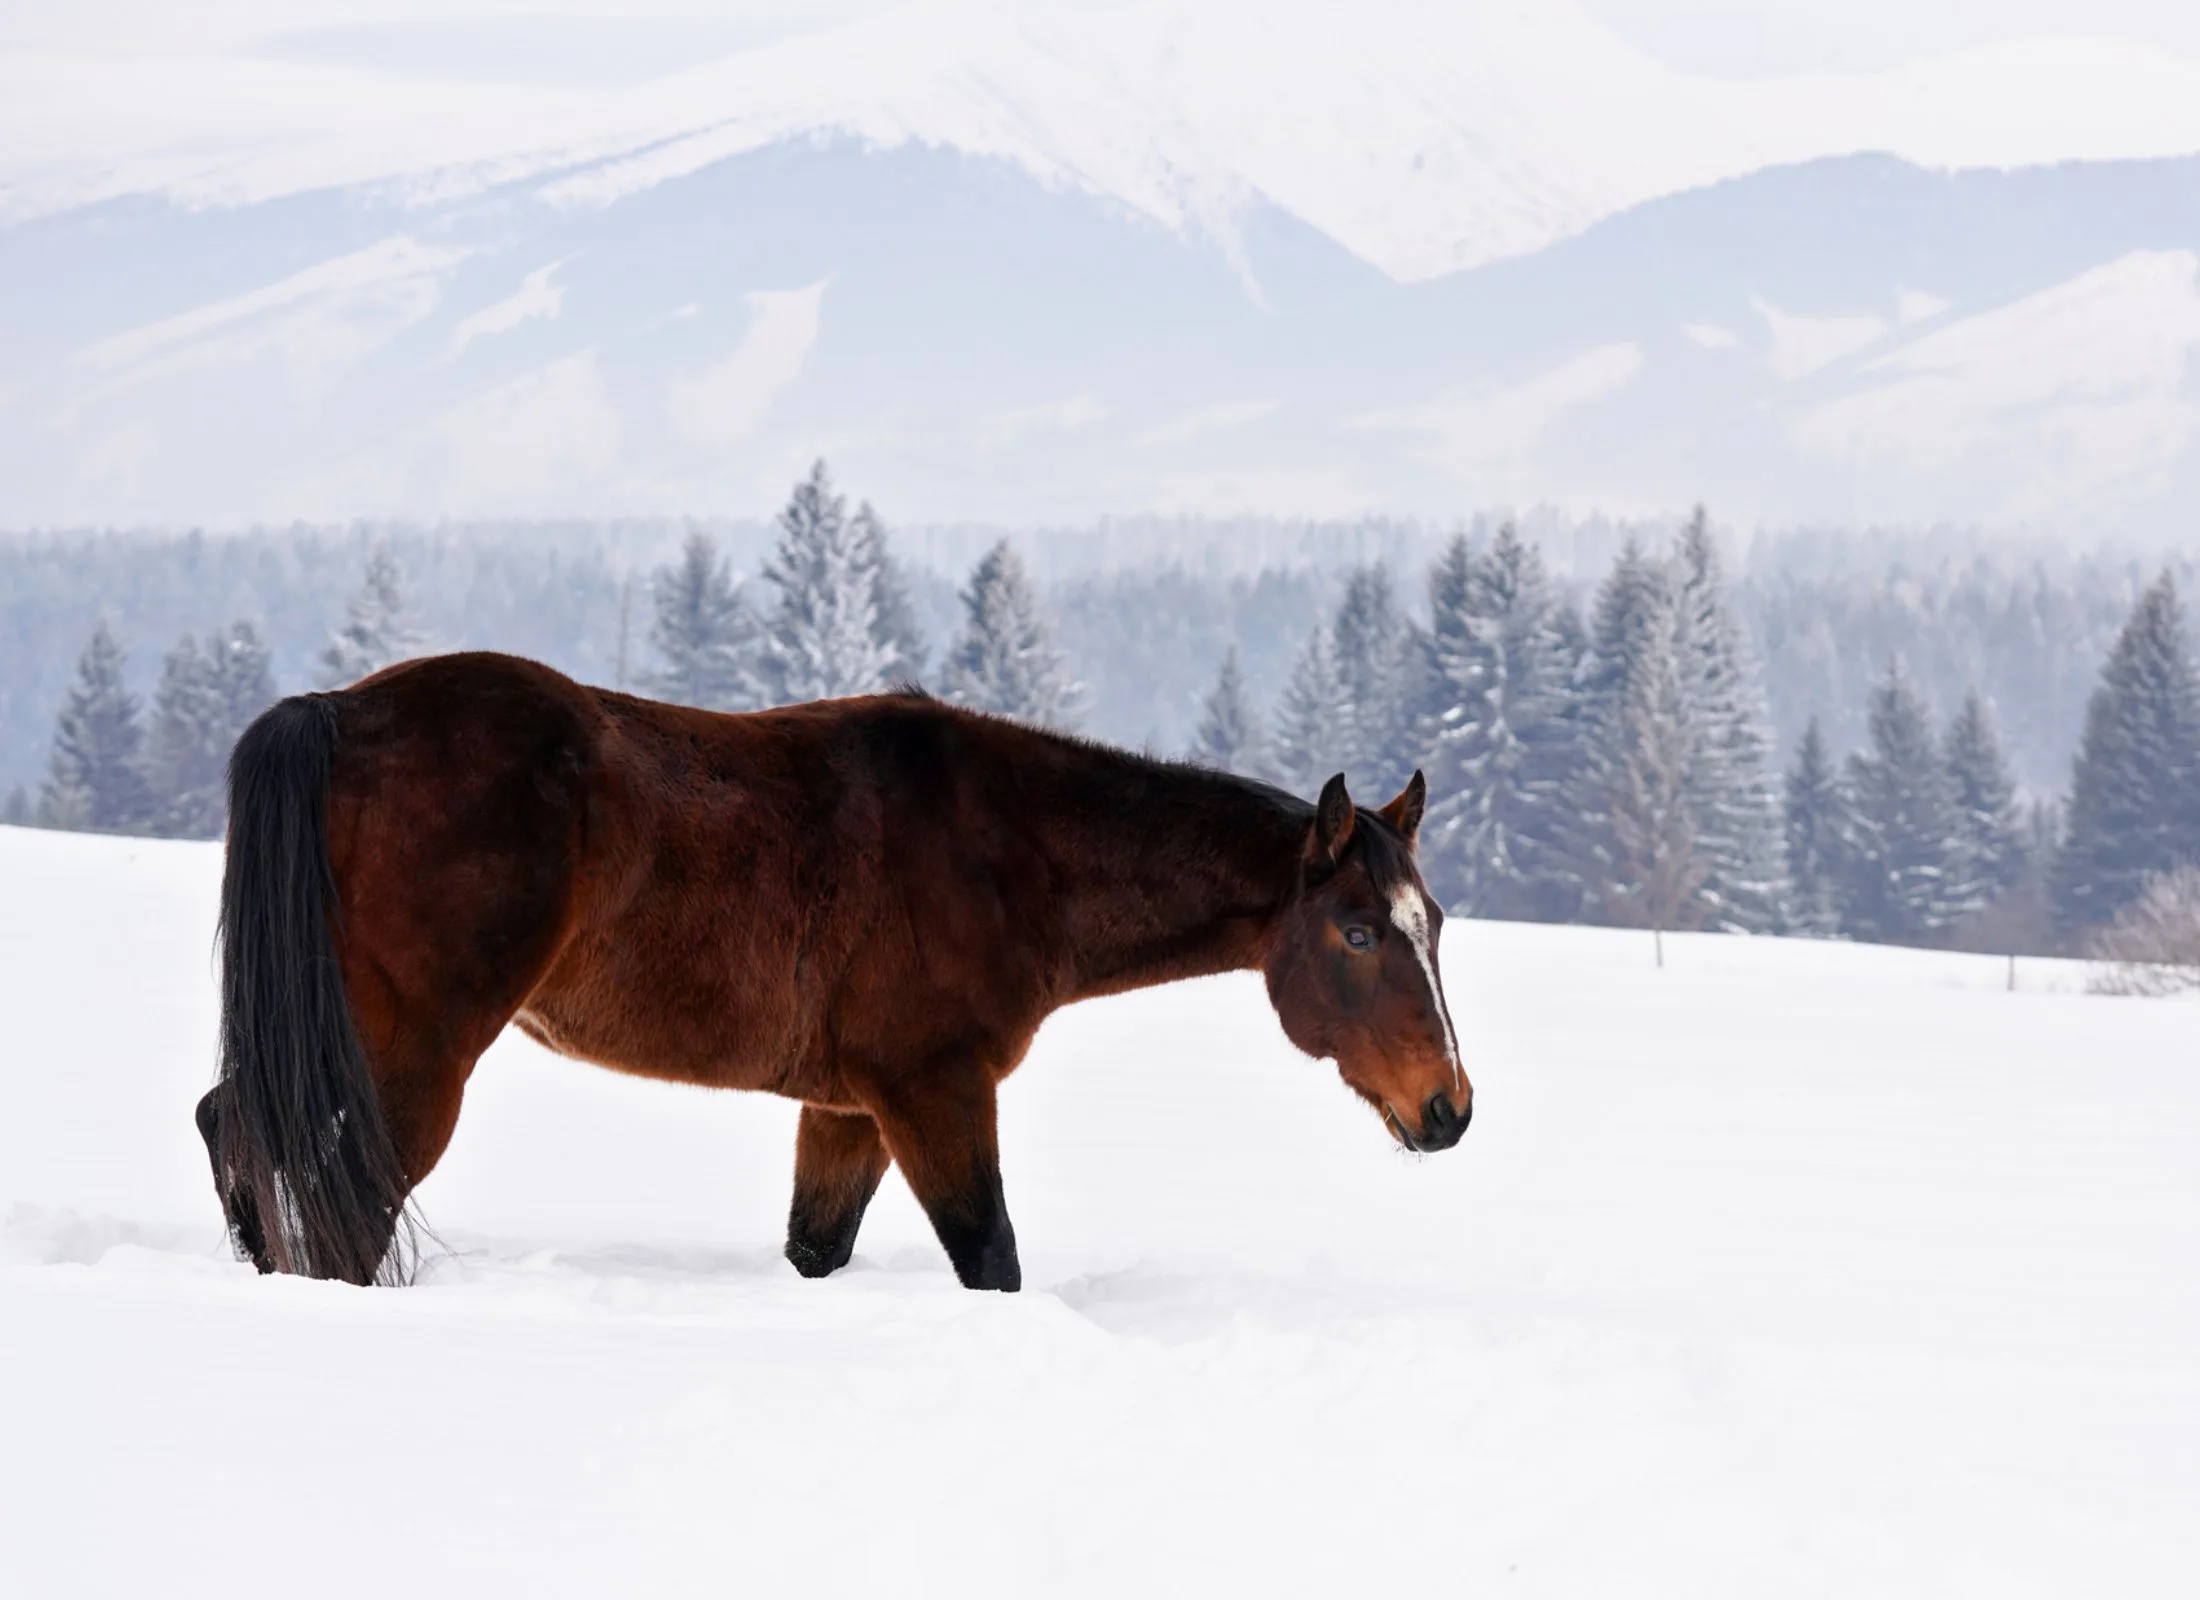 A horse walks through a deep snow drift with a winter forest scene and mountains in the background.